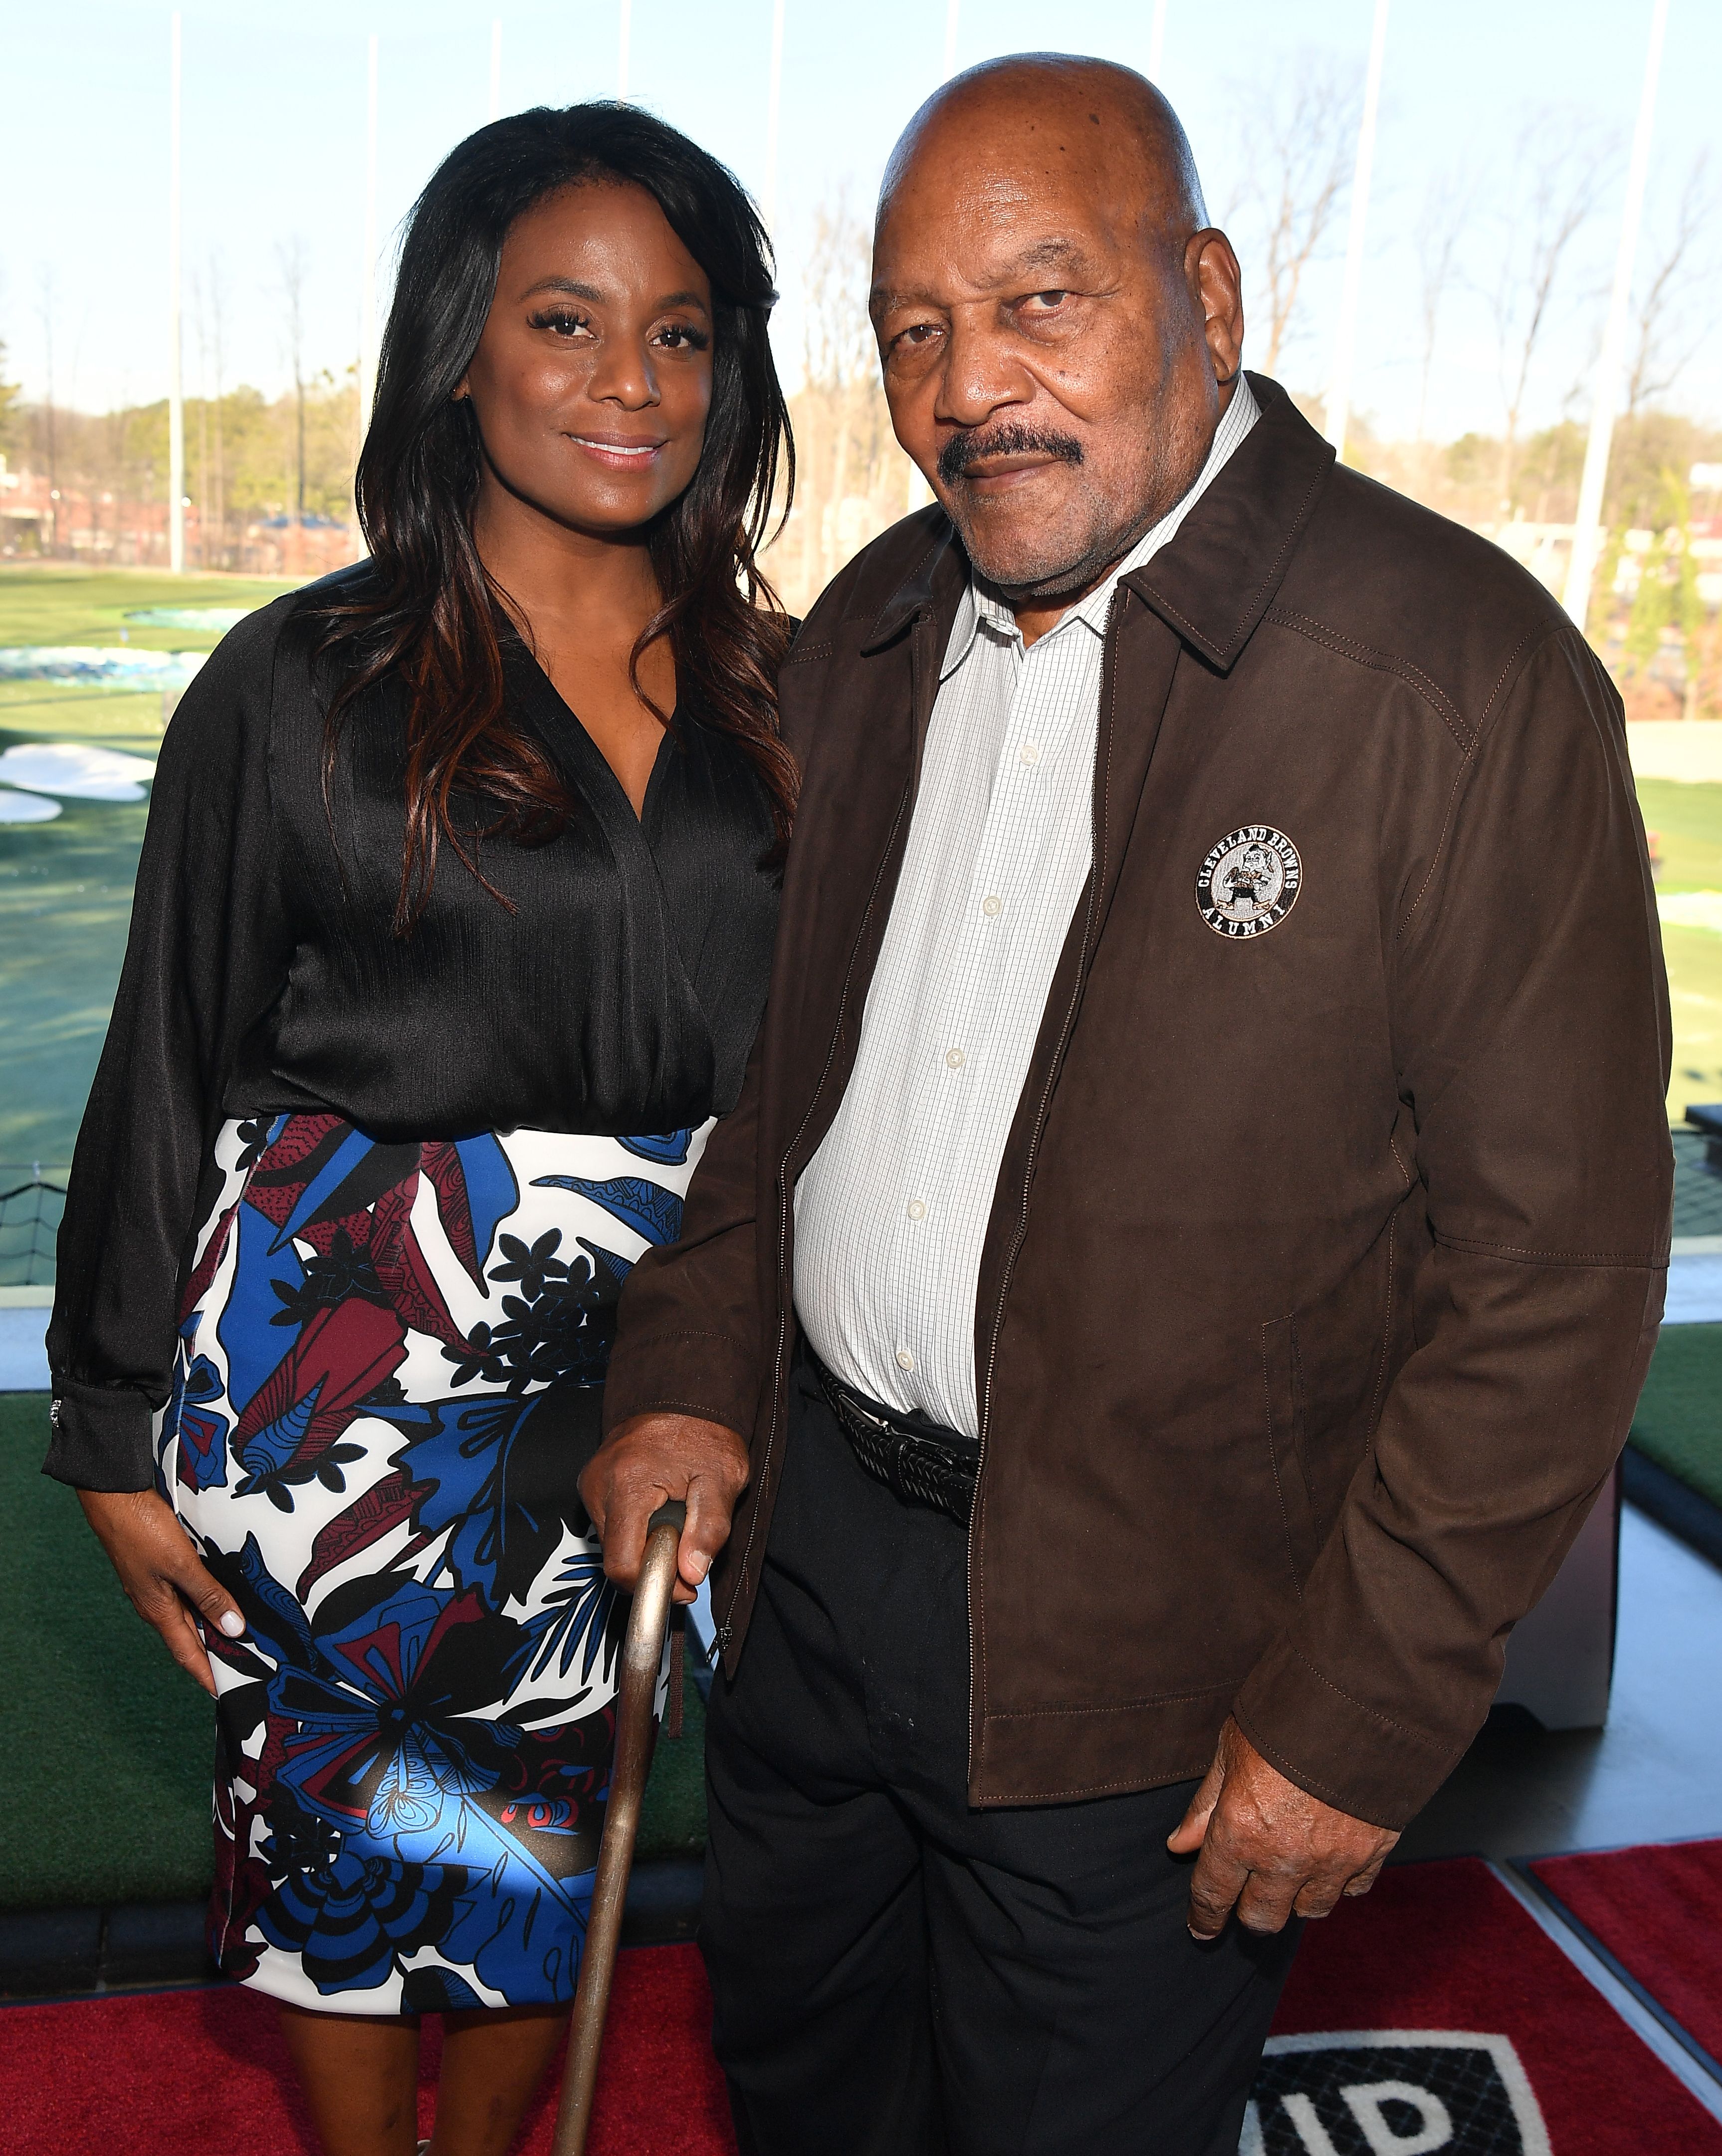 Jim Brown and his wife Monique Brown attend Jim Brown Legends of Football Golf Tournament at Topgolf Midtown on February 01, 2019 in Atlanta, Georgia | Source: Getty Images